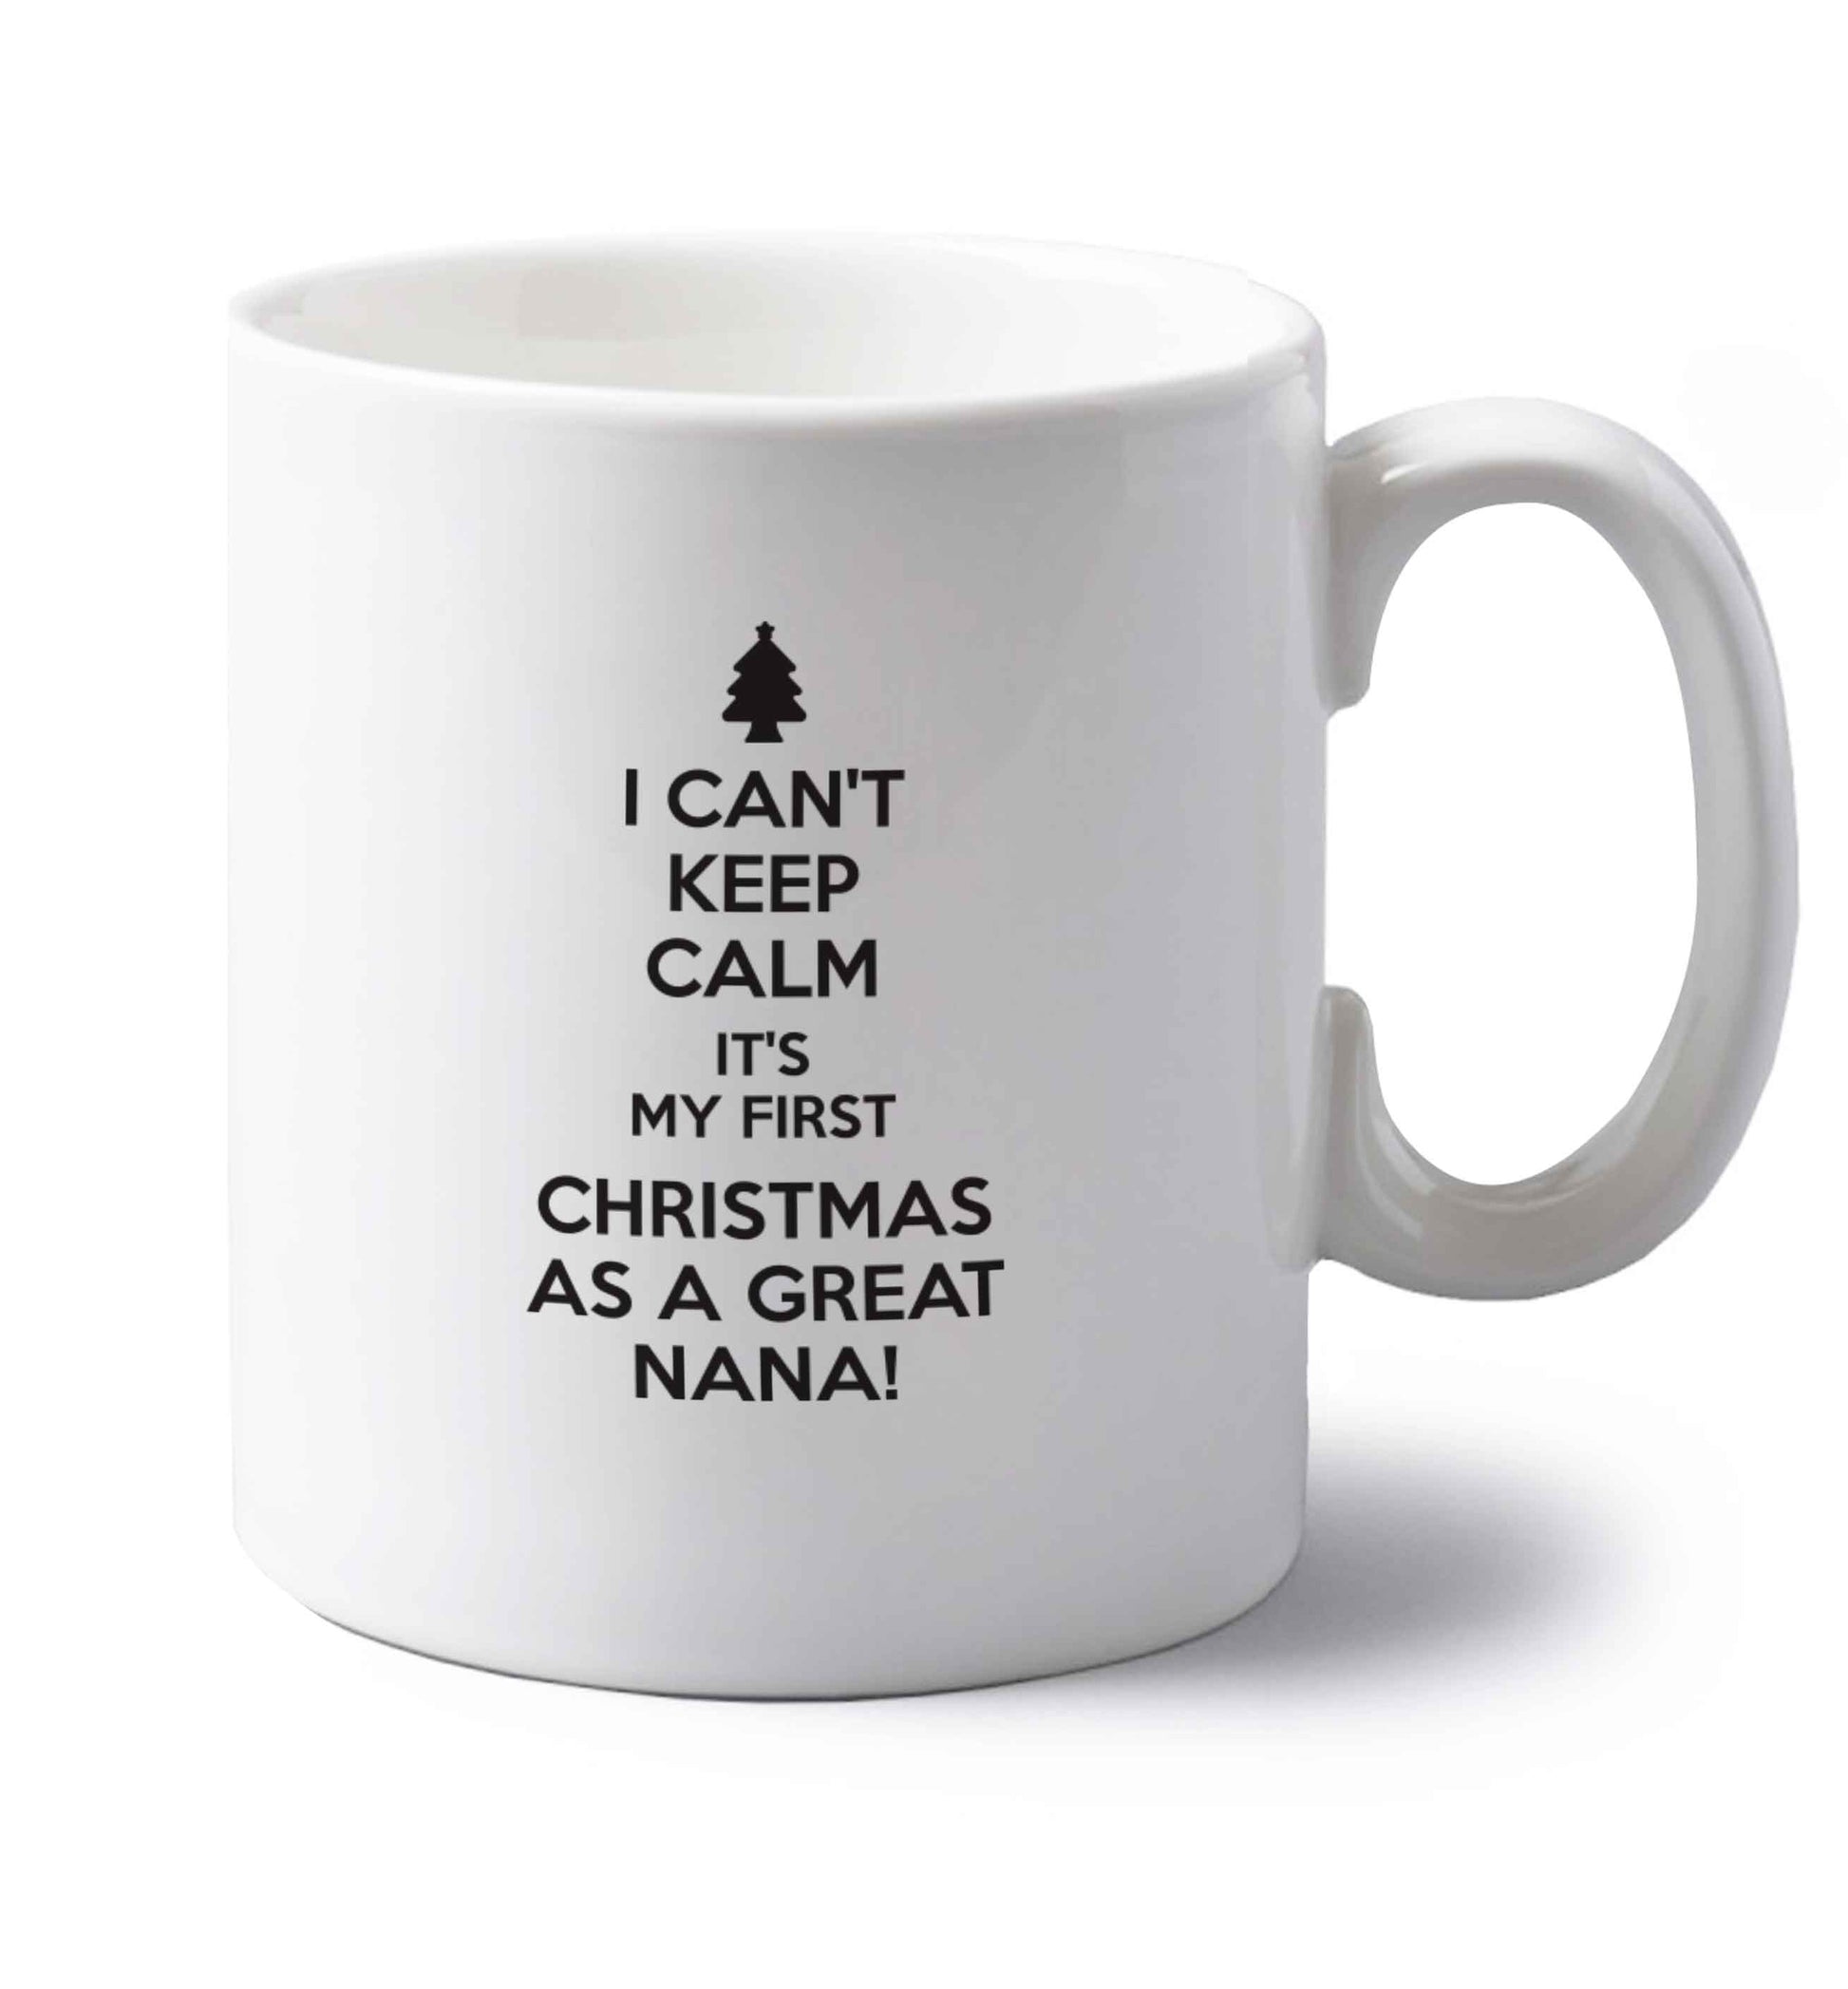 I can't keep calm it's my first Christmas as a great nana! left handed white ceramic mug 